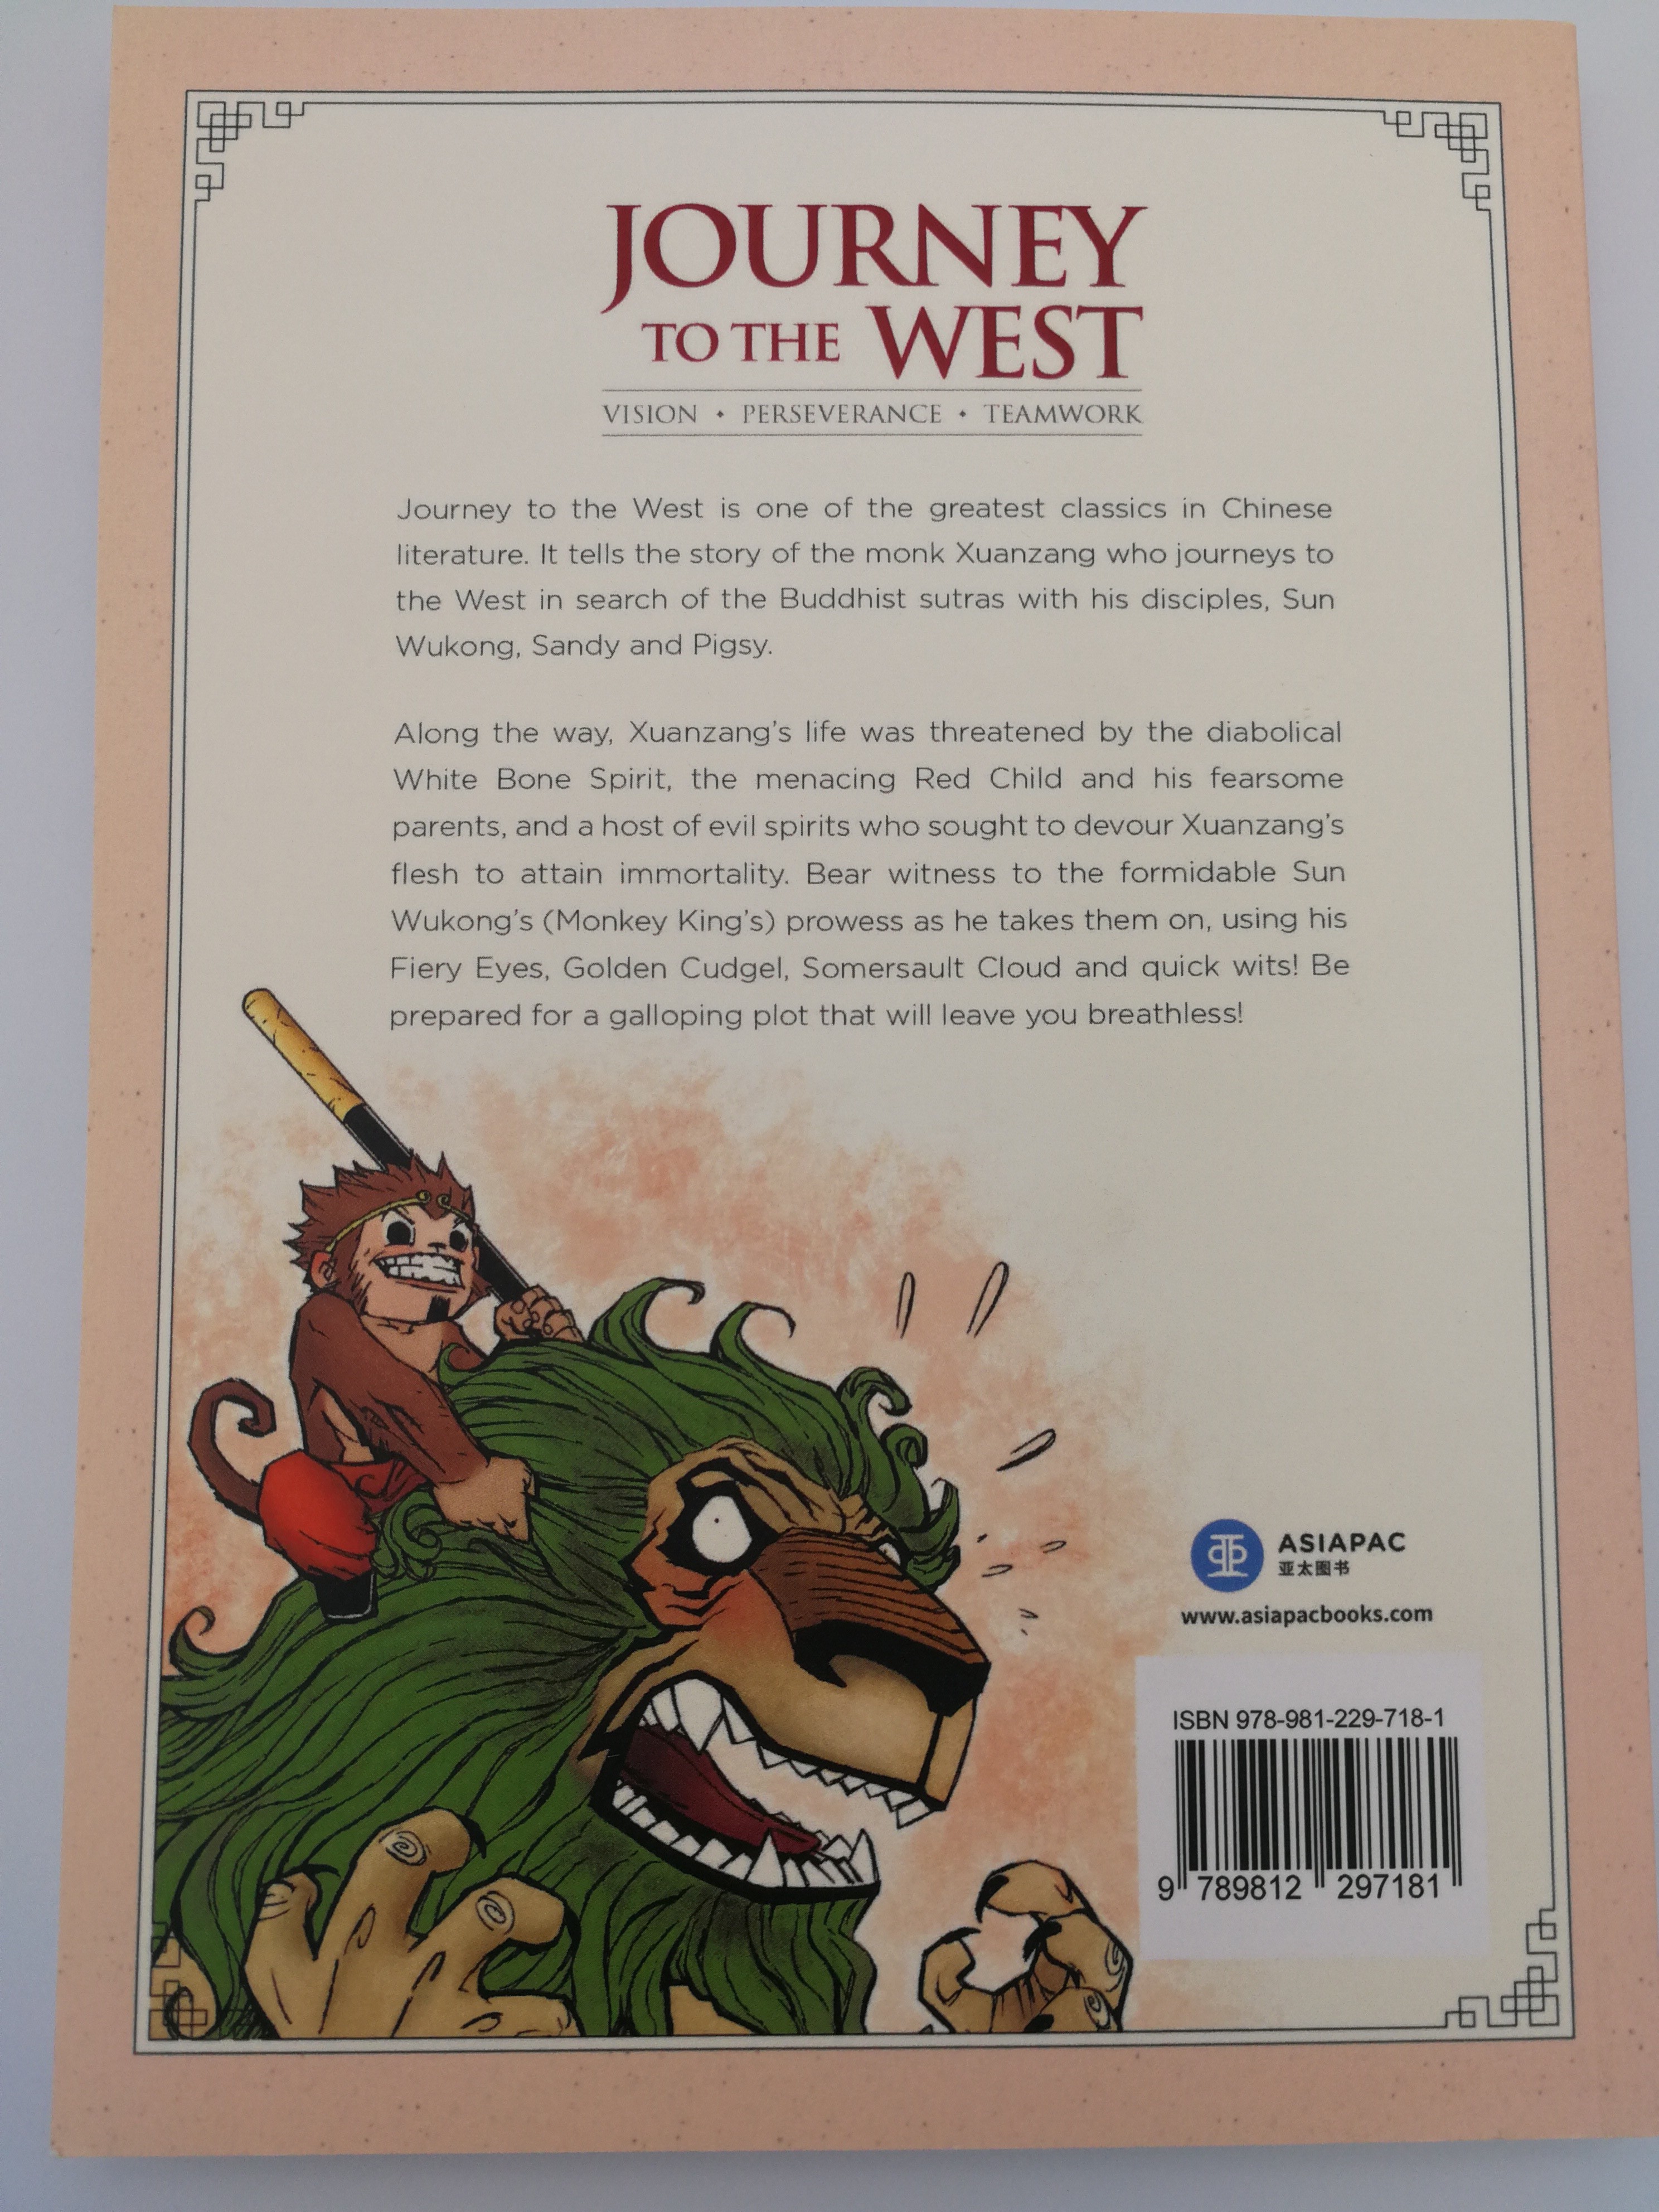 journey to the west illustrated book